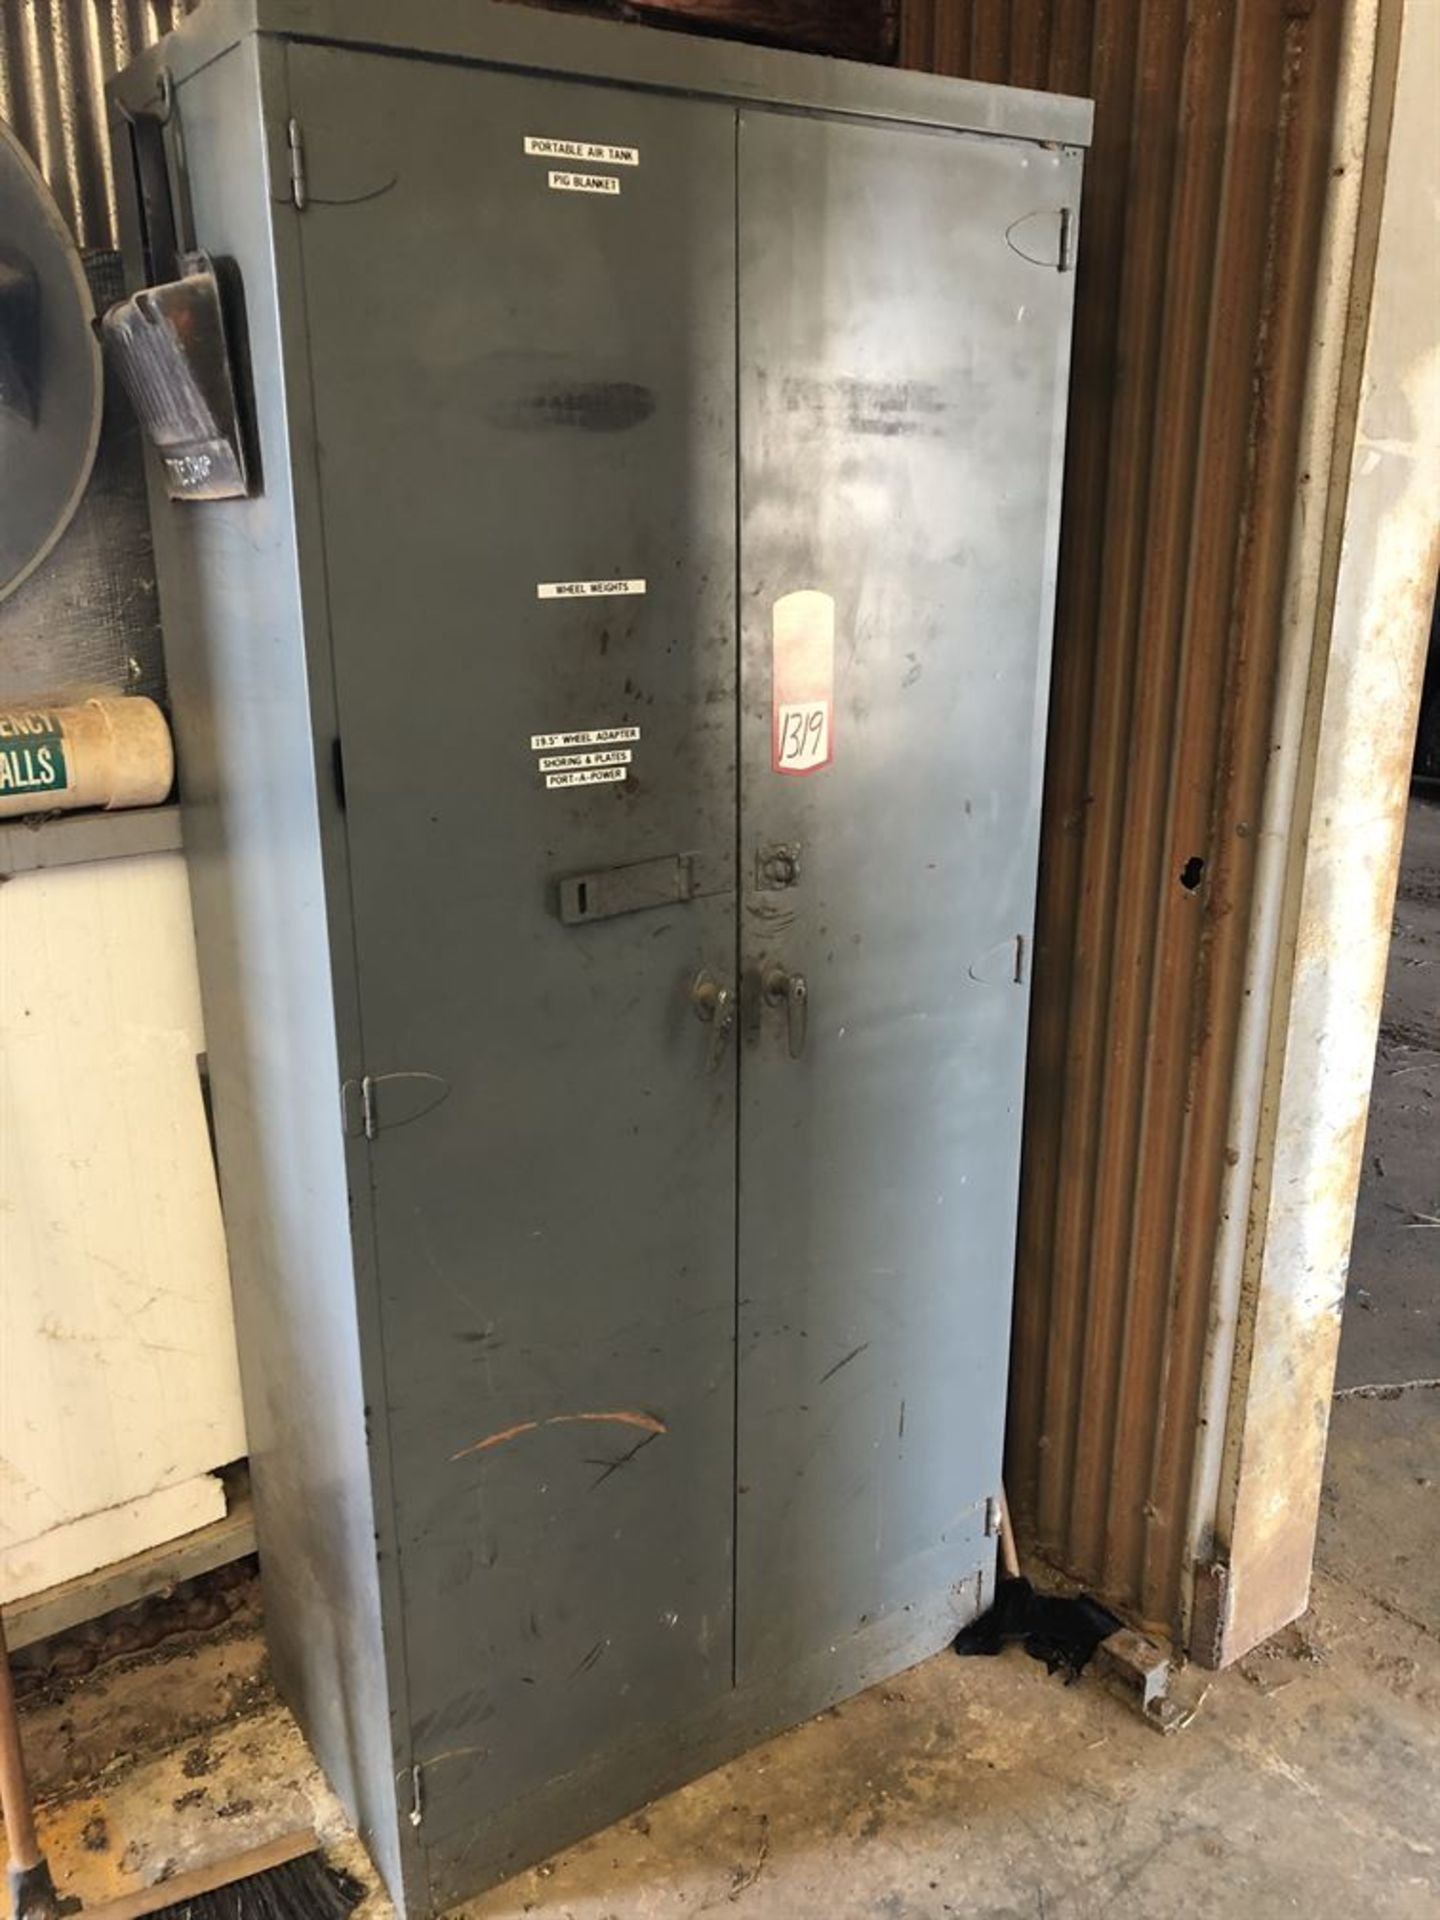 Lot Comprising of (1) Steel Shop Cabinet w/ Assorted Tire Weights, and (2) Shop Cabinets, w/